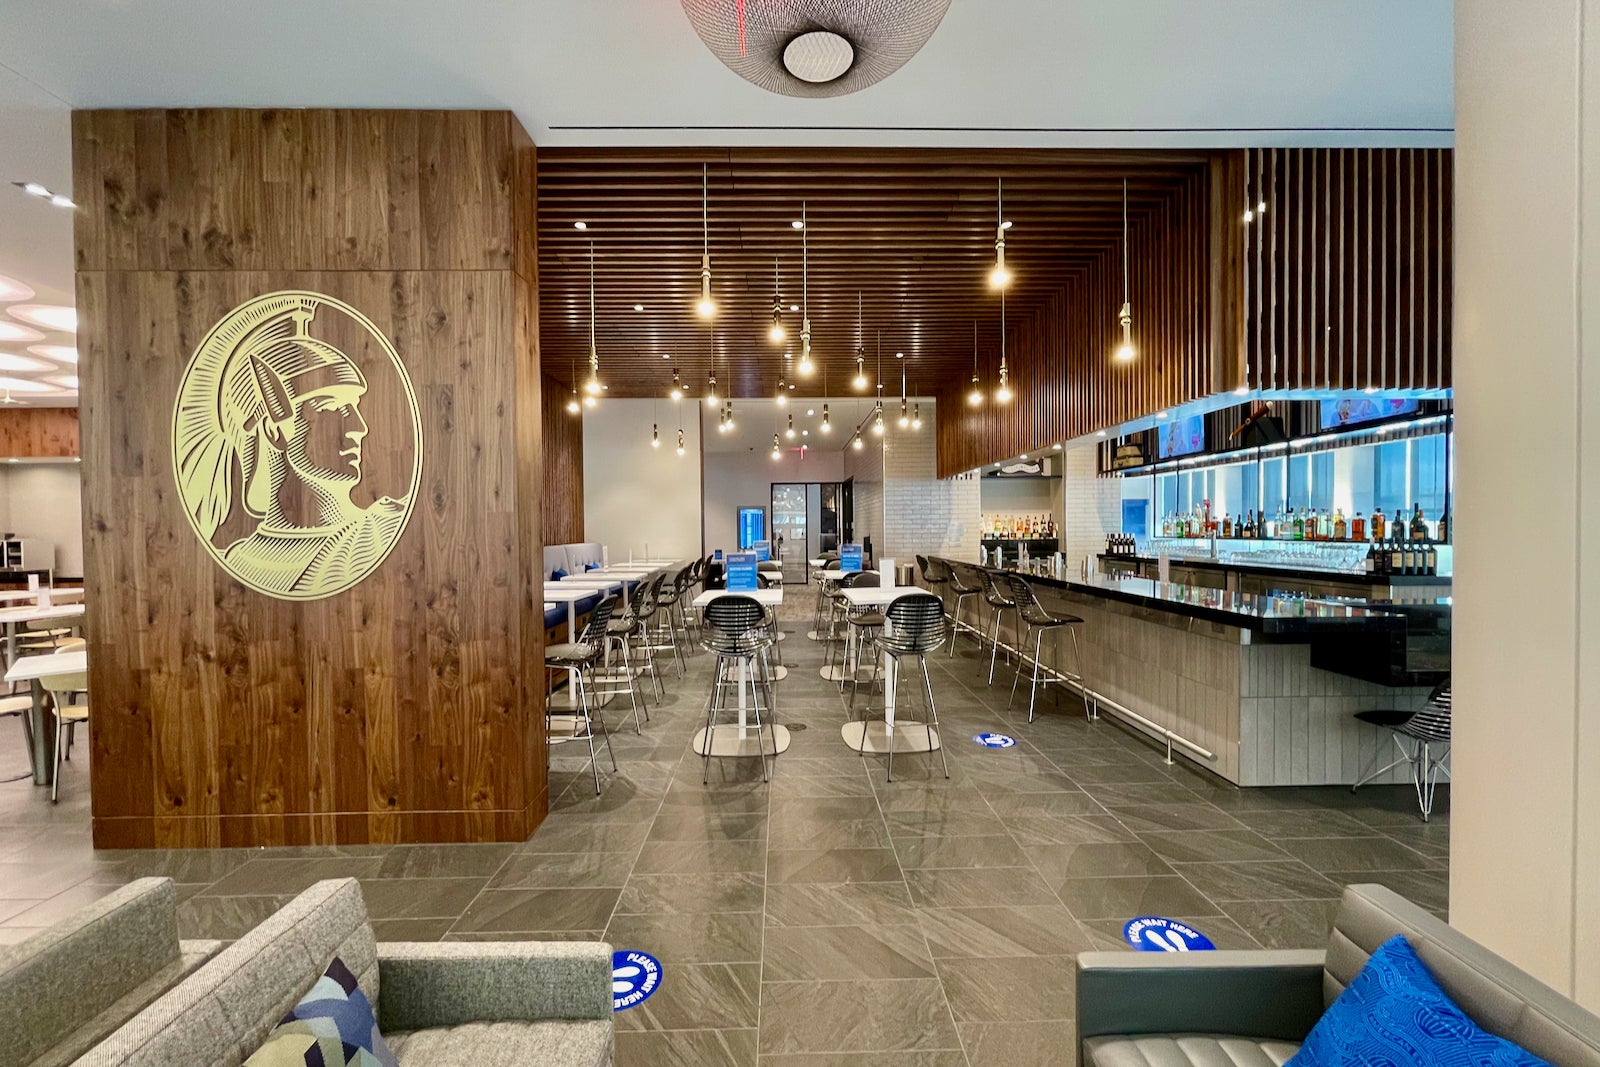 Amex Centurion Lounges: Locations and access